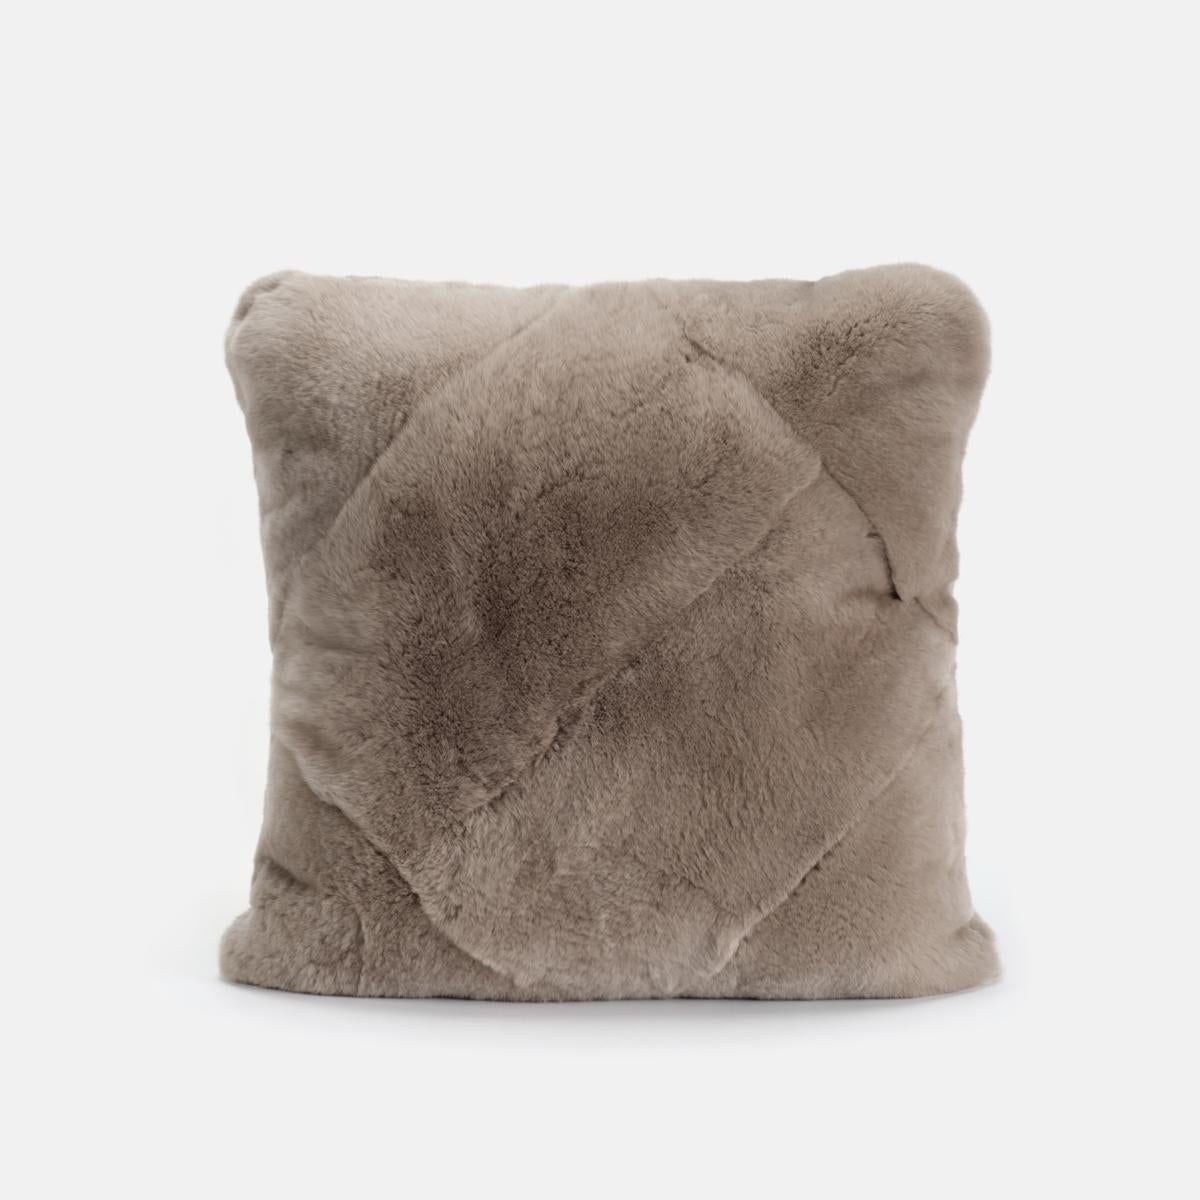 A plain Superior Lapin fur cushion that fits in every room. Using a multitude of these pillow in different shades of colors can really make your sofa pop out of the living room with the color accent you like the most.

The craftsmanship requires a